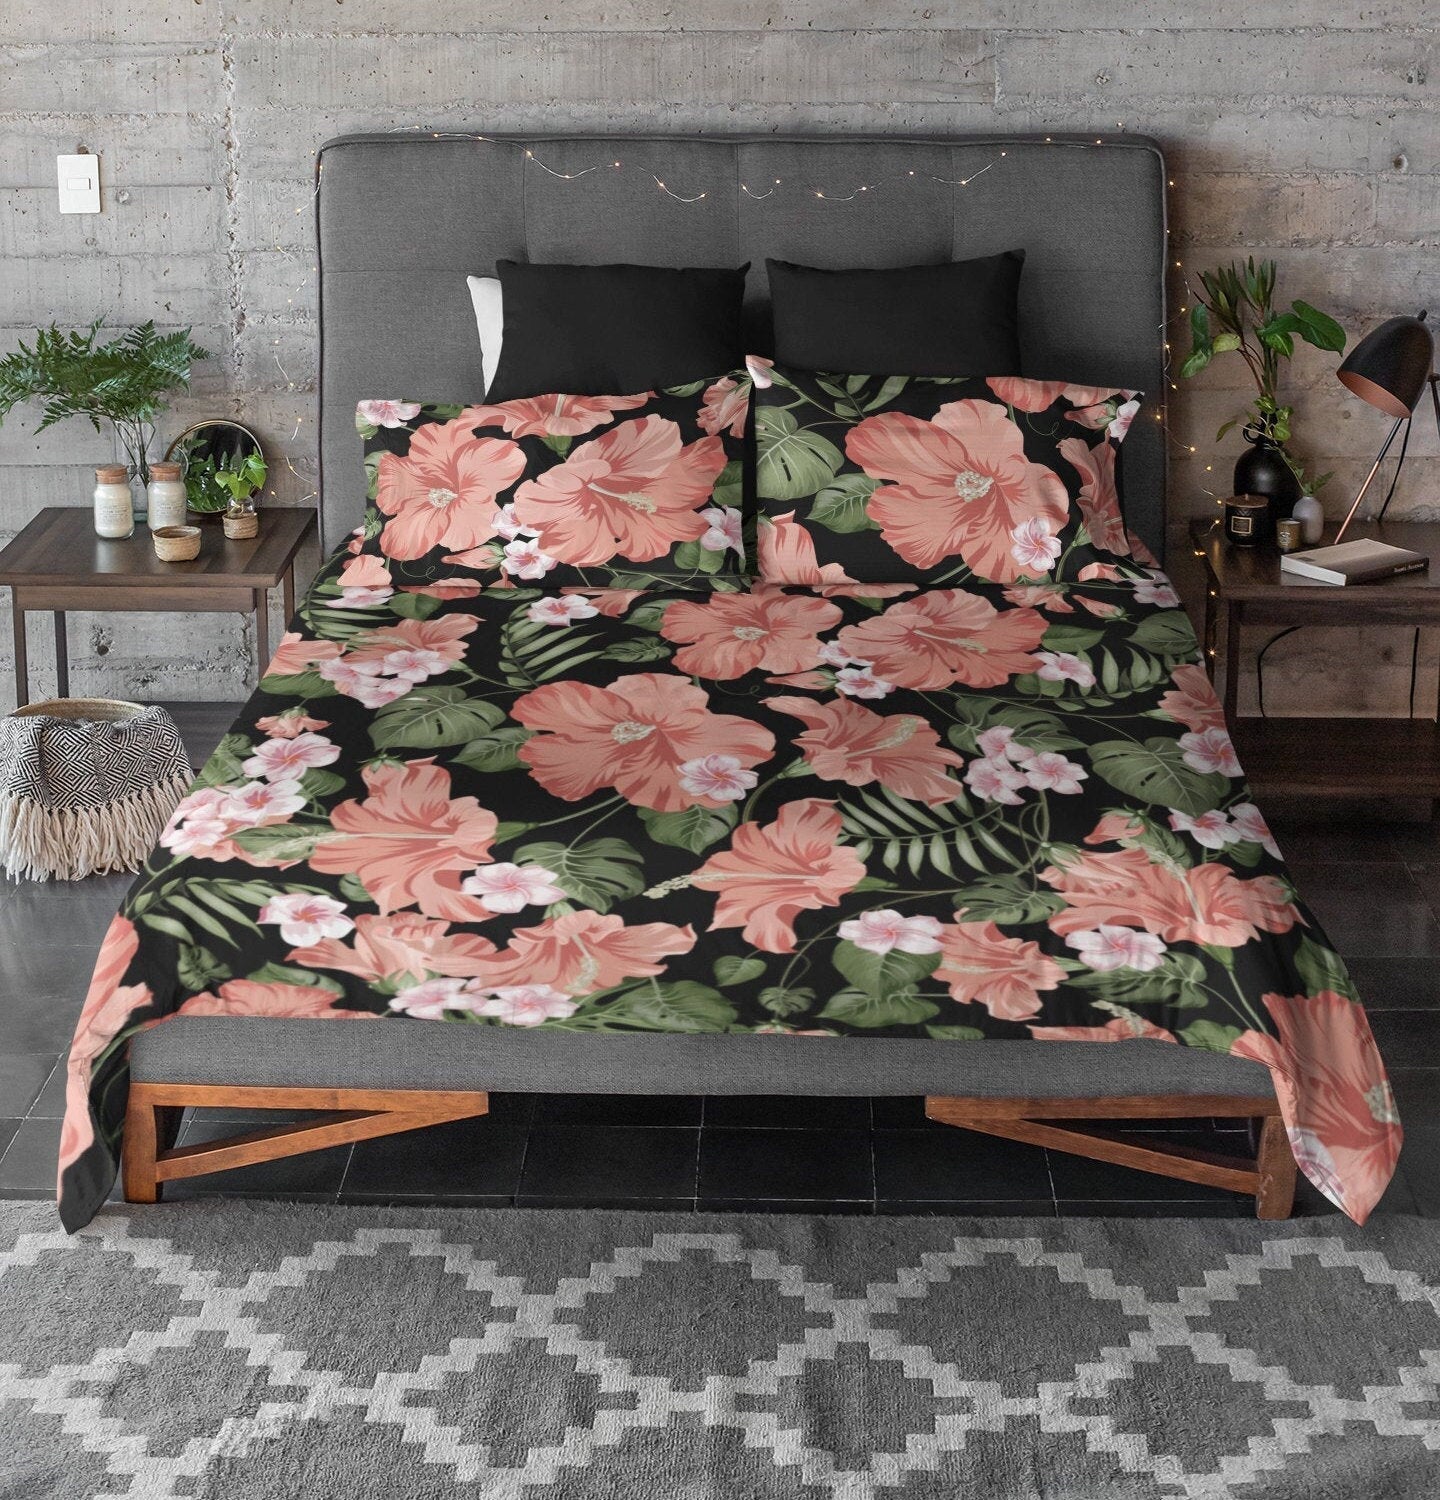 daintyduvet Hibiscus Duvet Cover Set with Cherry Blossoms Flowers | Floral Bedding Set